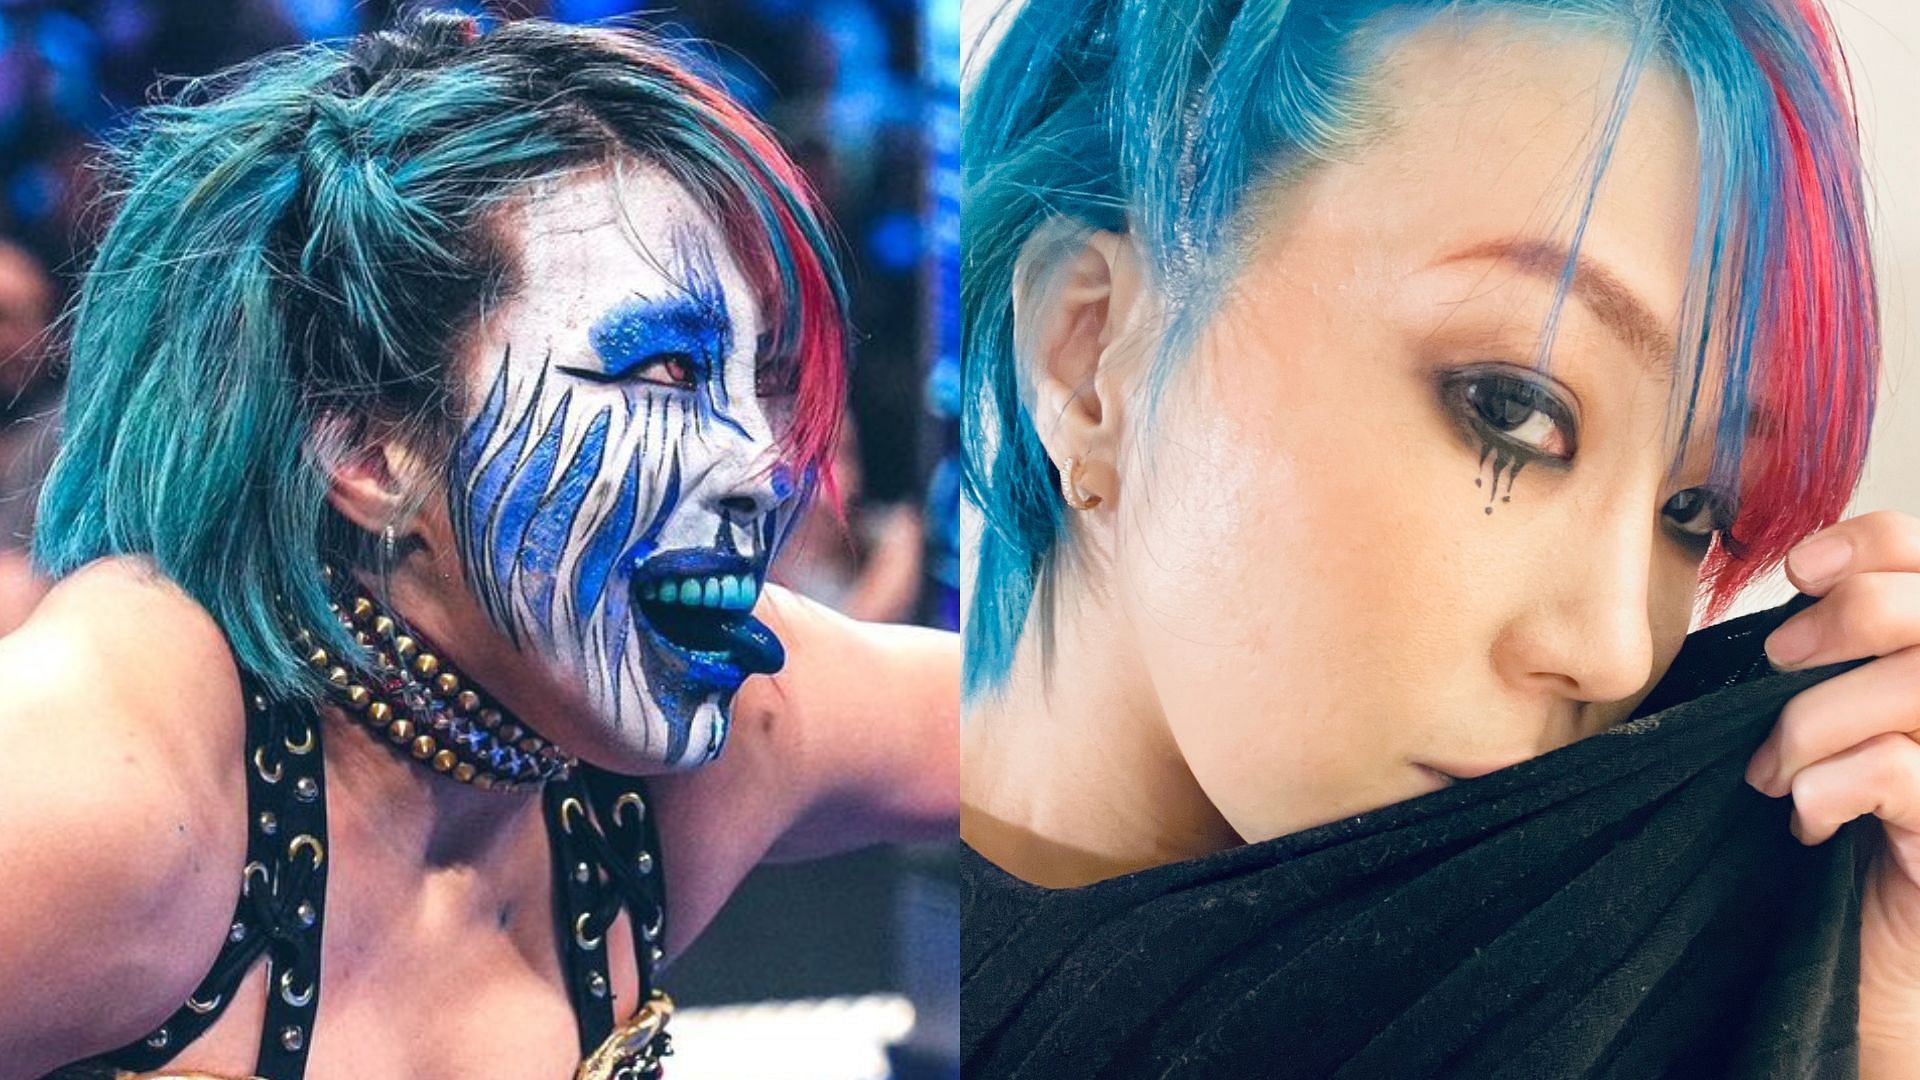 Asuka recently lost her championship at SummerSlam.